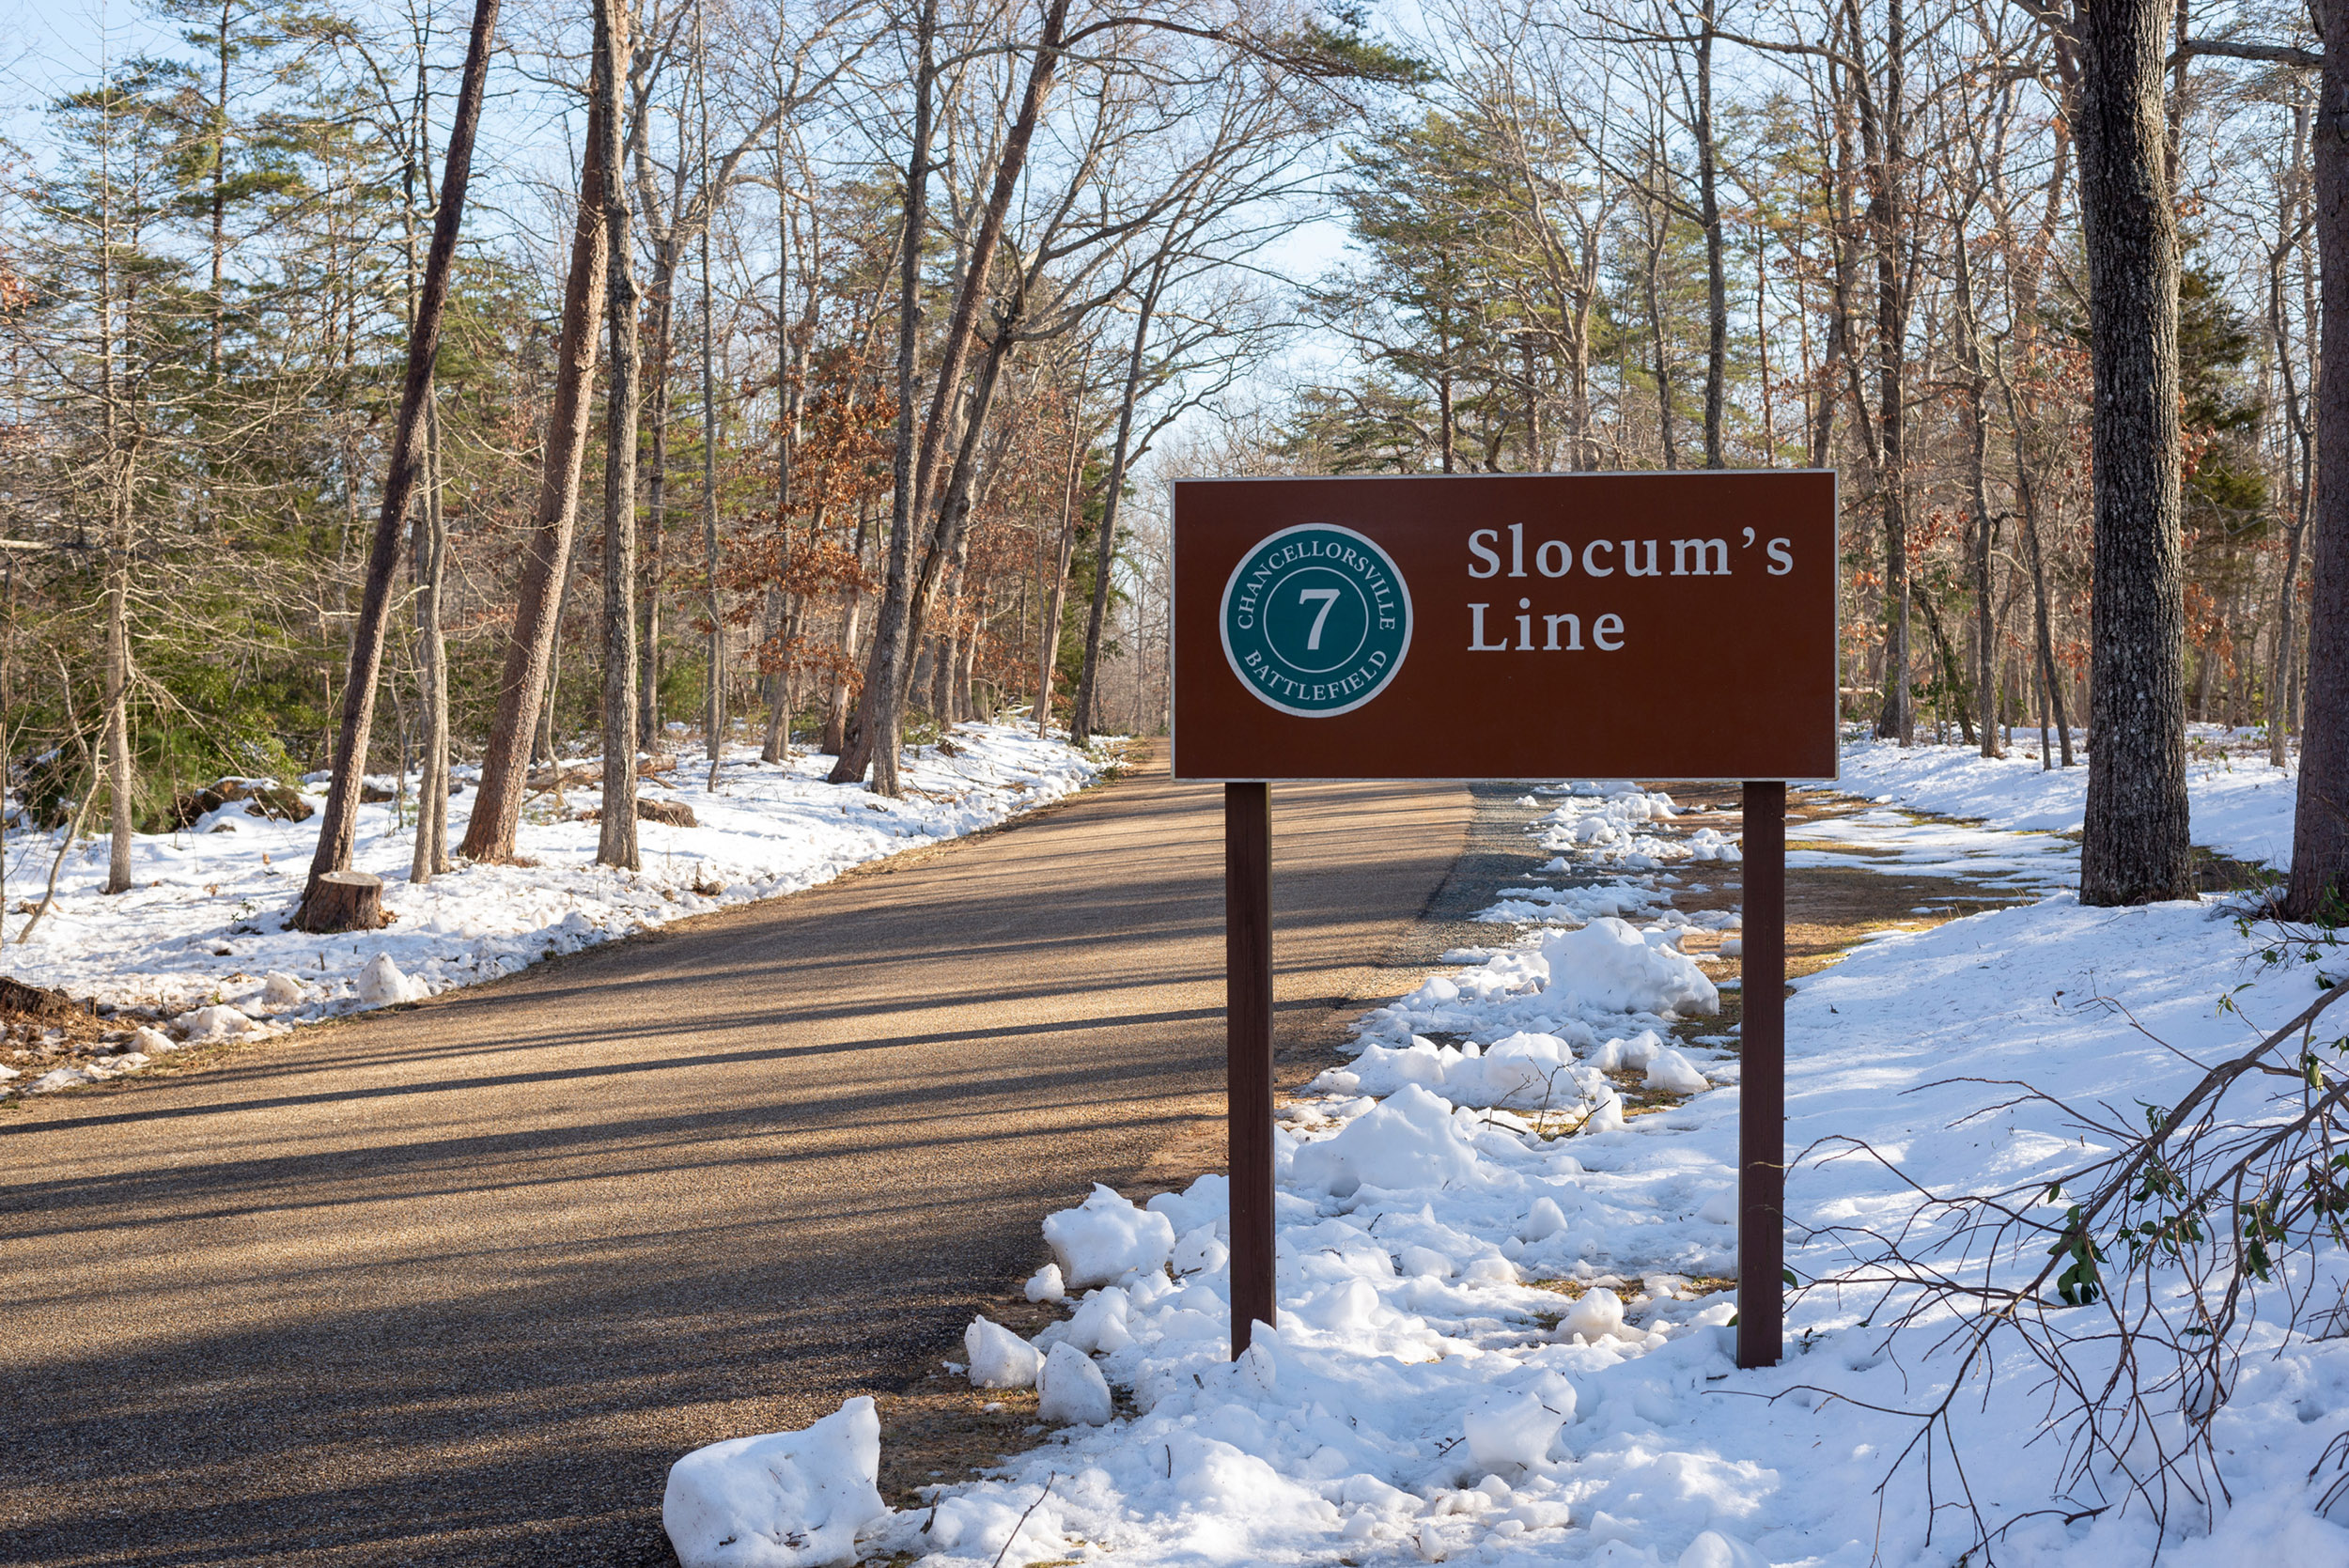 A sign for Slocum's Line next to a road.